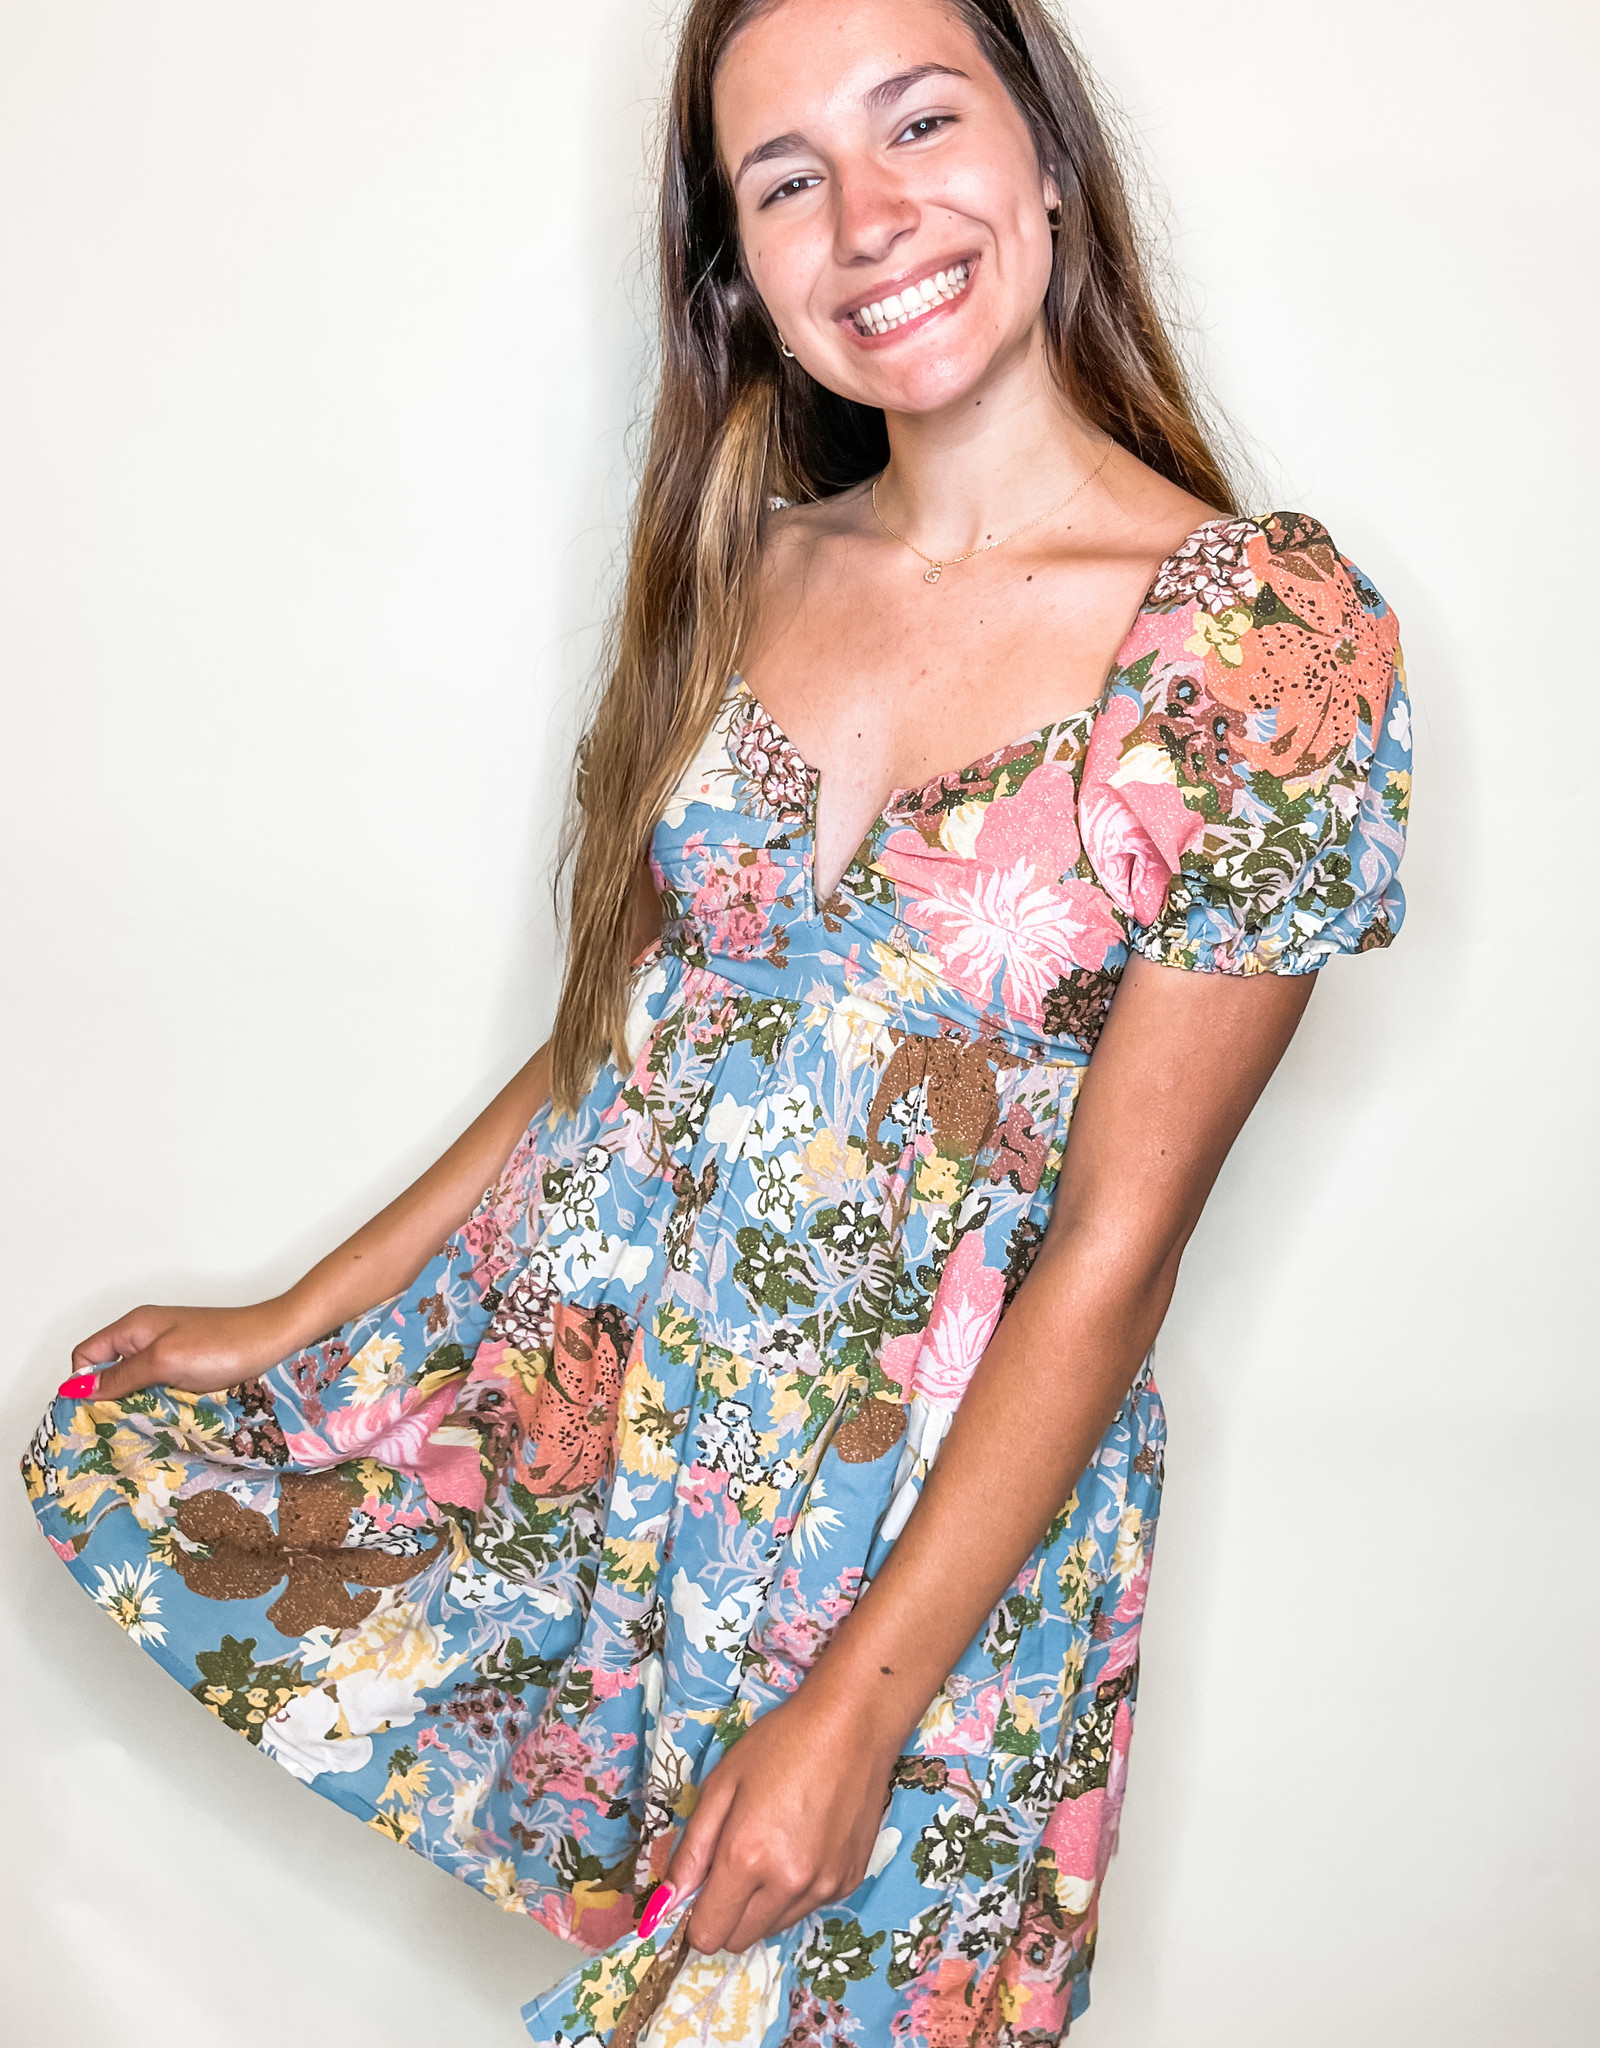 Edgy Floral Dress